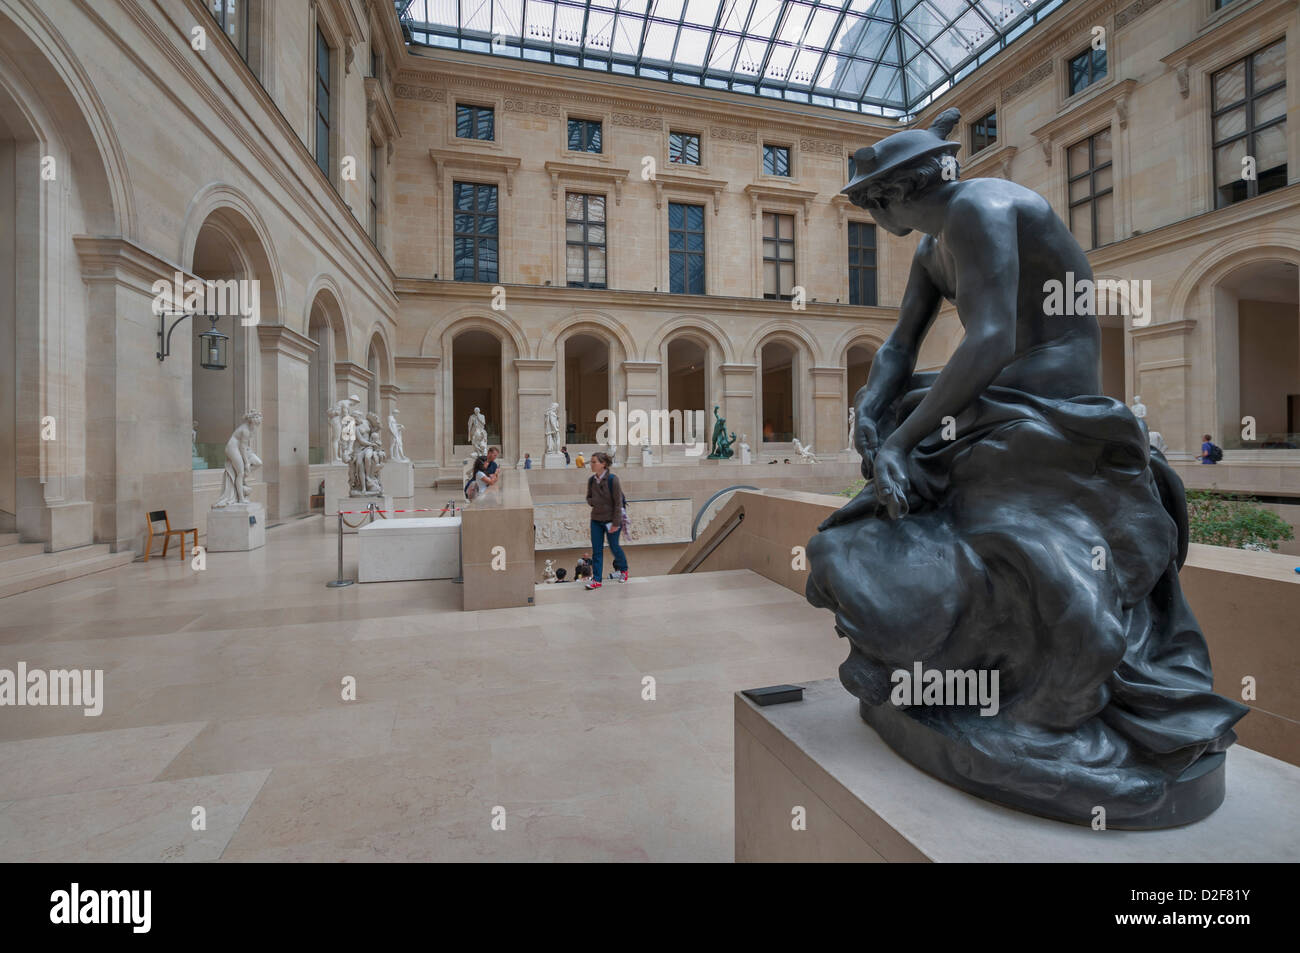 The Louvre Museum in Paris,France Stock Photo